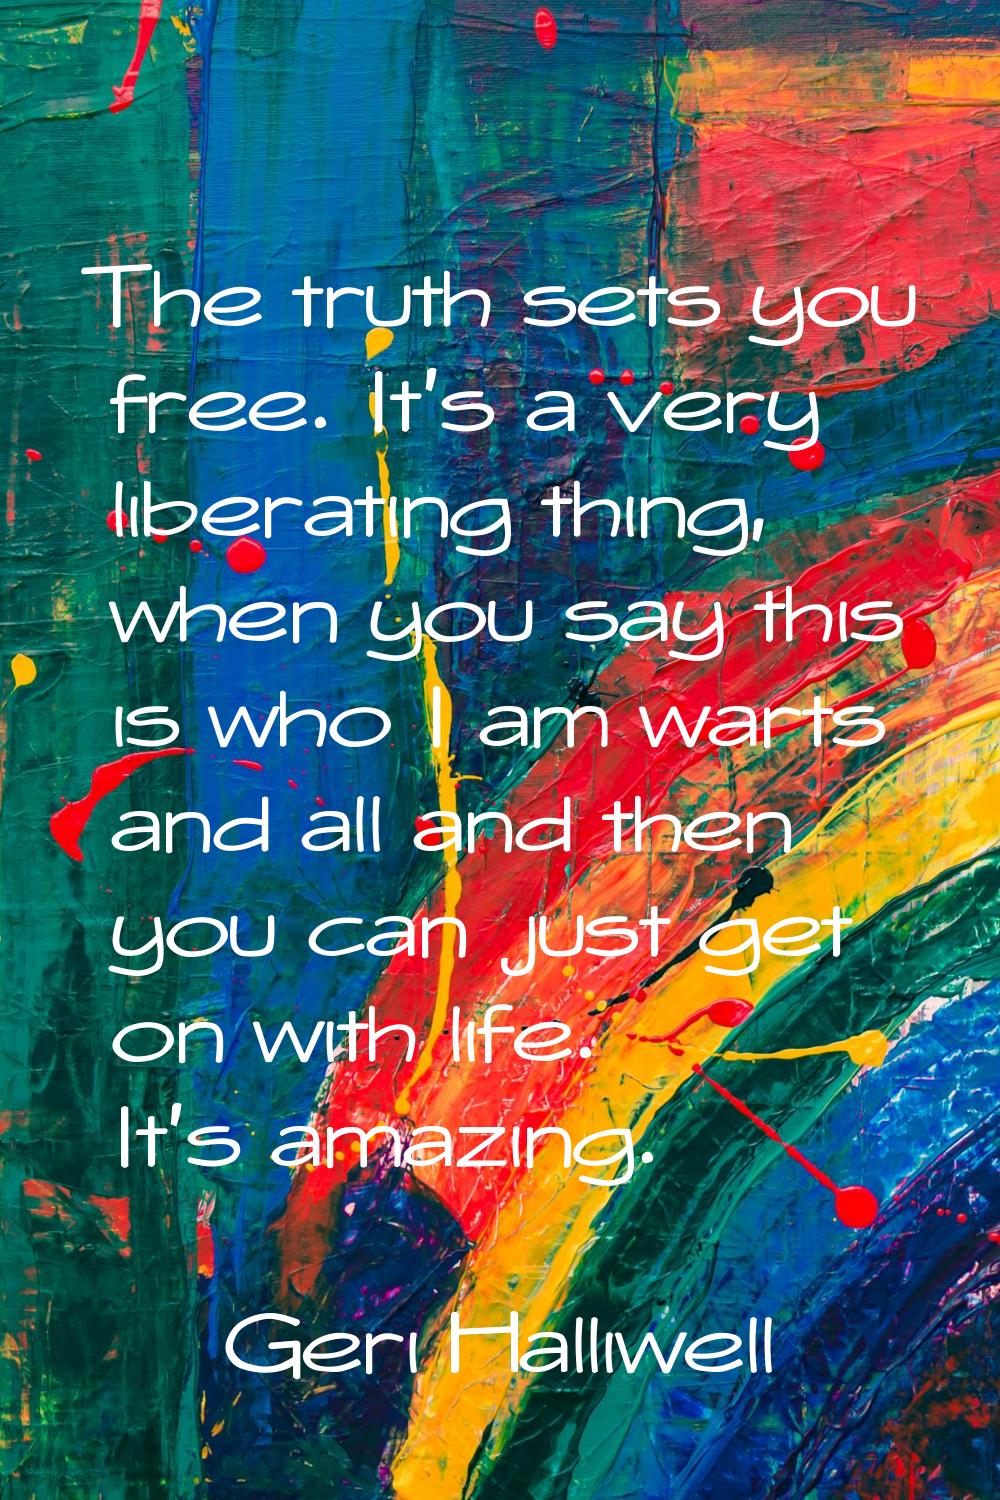 The truth sets you free. It's a very liberating thing, when you say this is who I am warts and all 